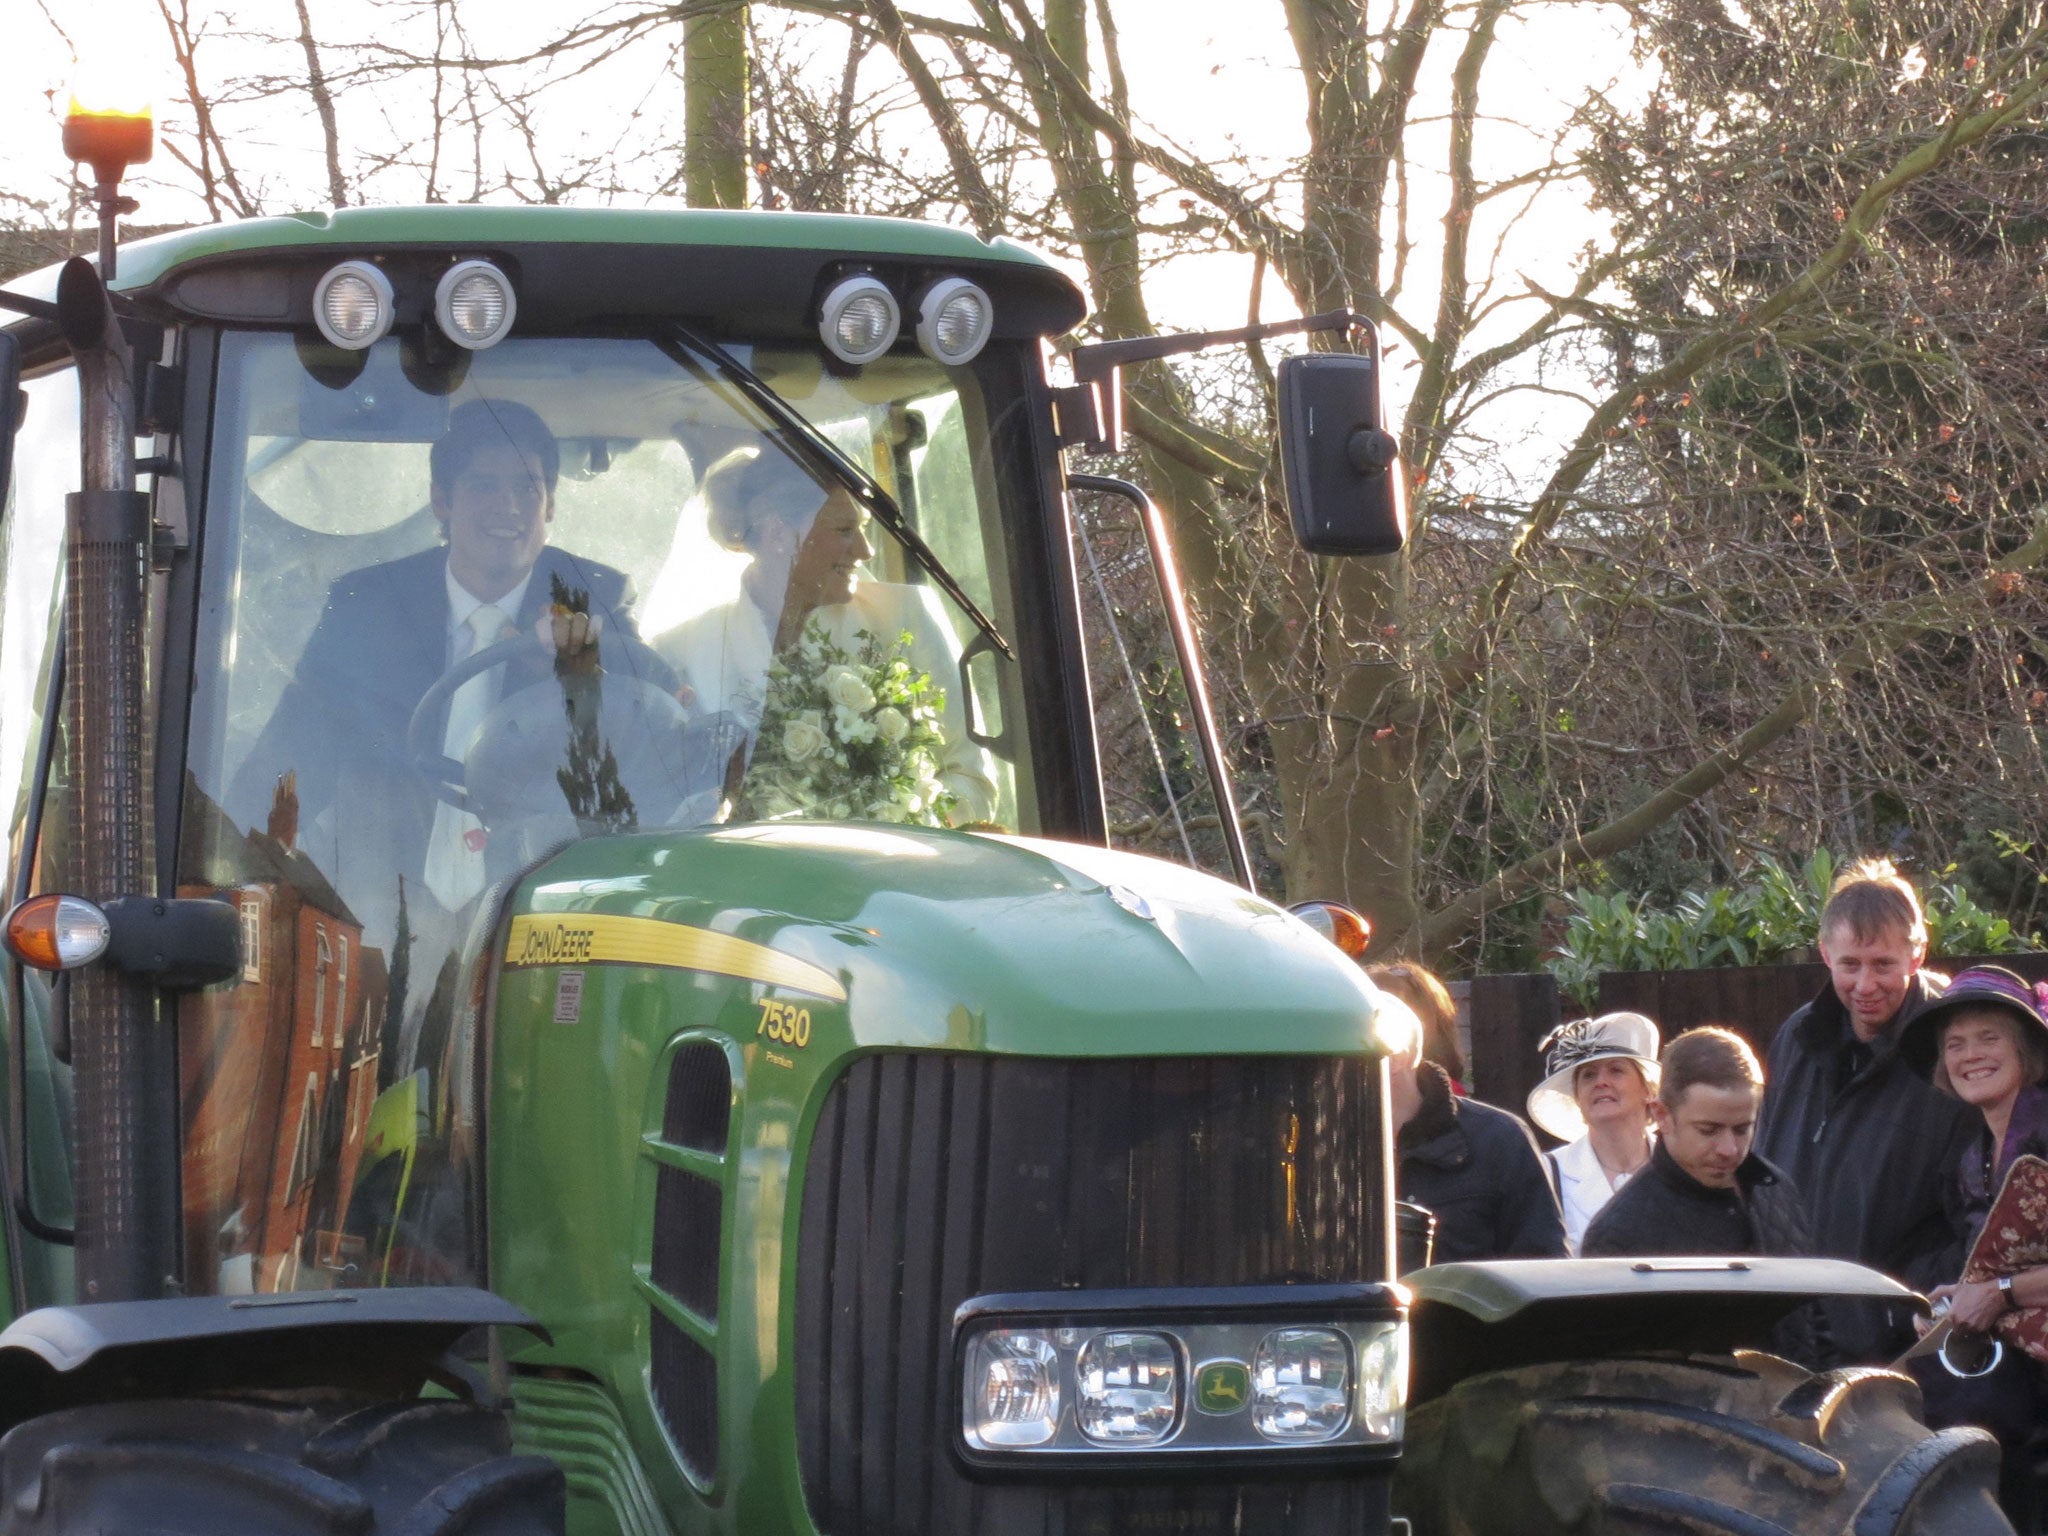 Plenty of welly: Alastair Cook draws admiring glances as he and his bride ride off in a tractor on their wedding day